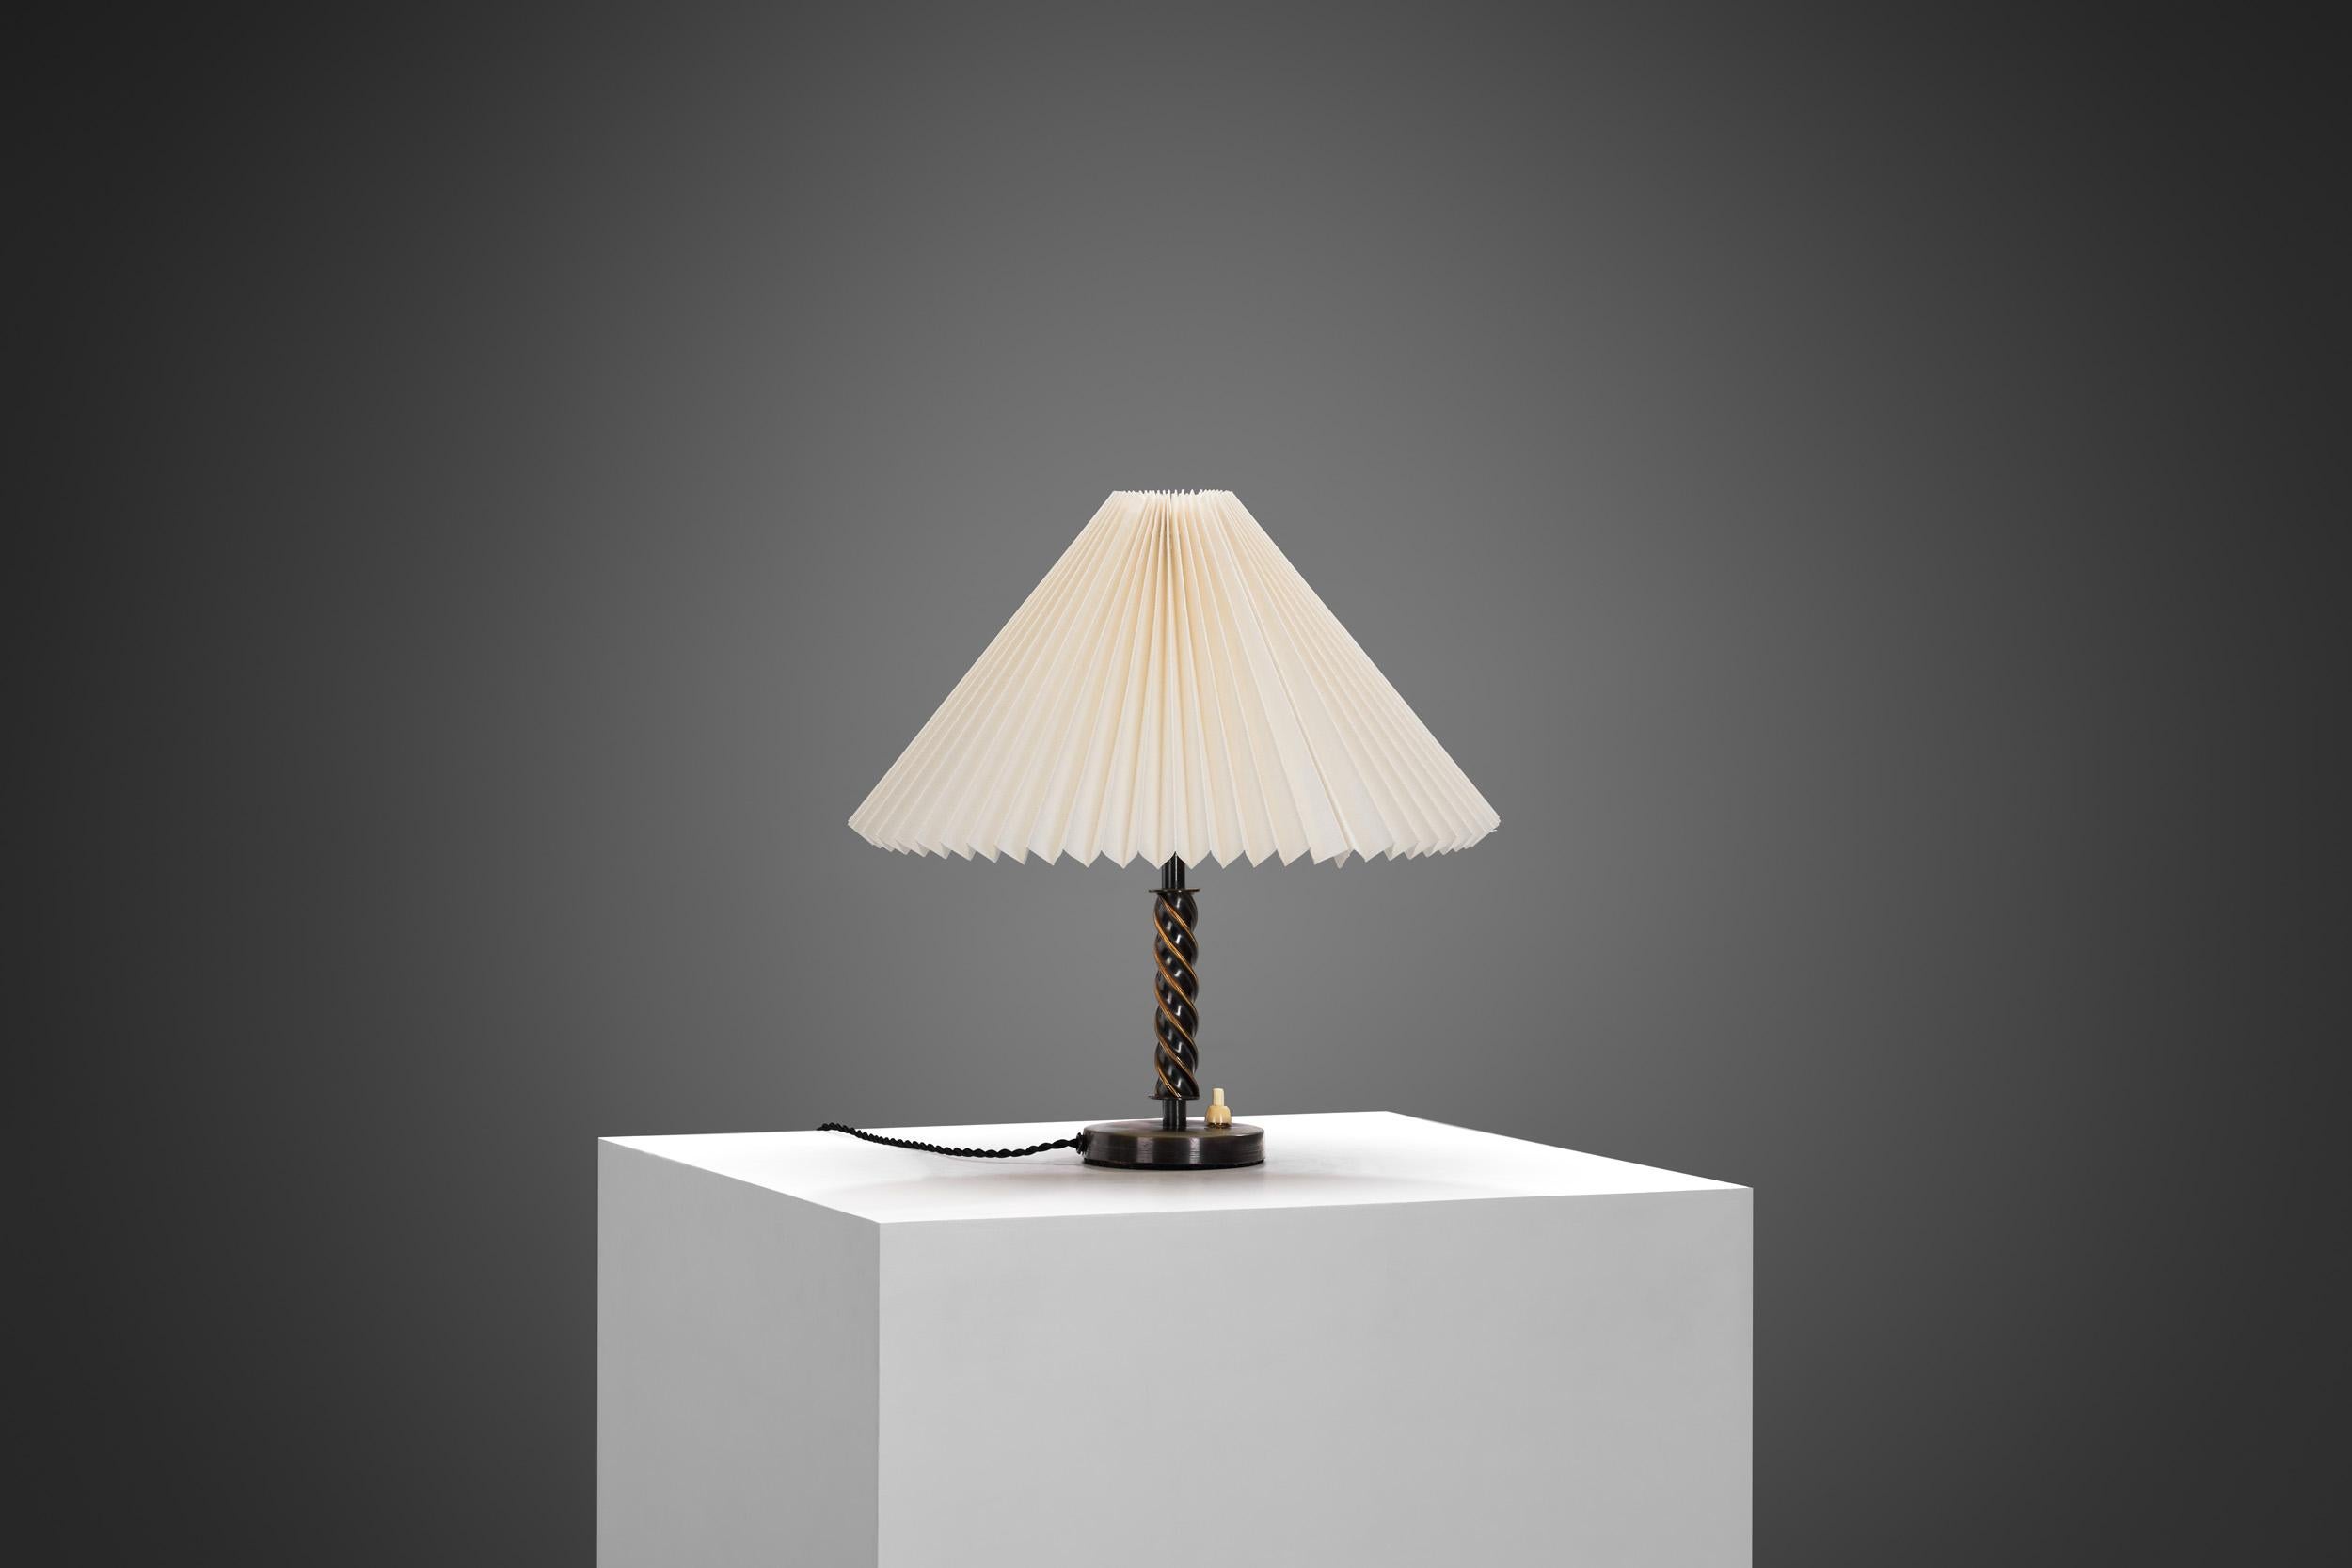 Mid-20th Century Scandinavian Table Lamp with Pleated Empire Lampshade, Scandinavia ca 1940s